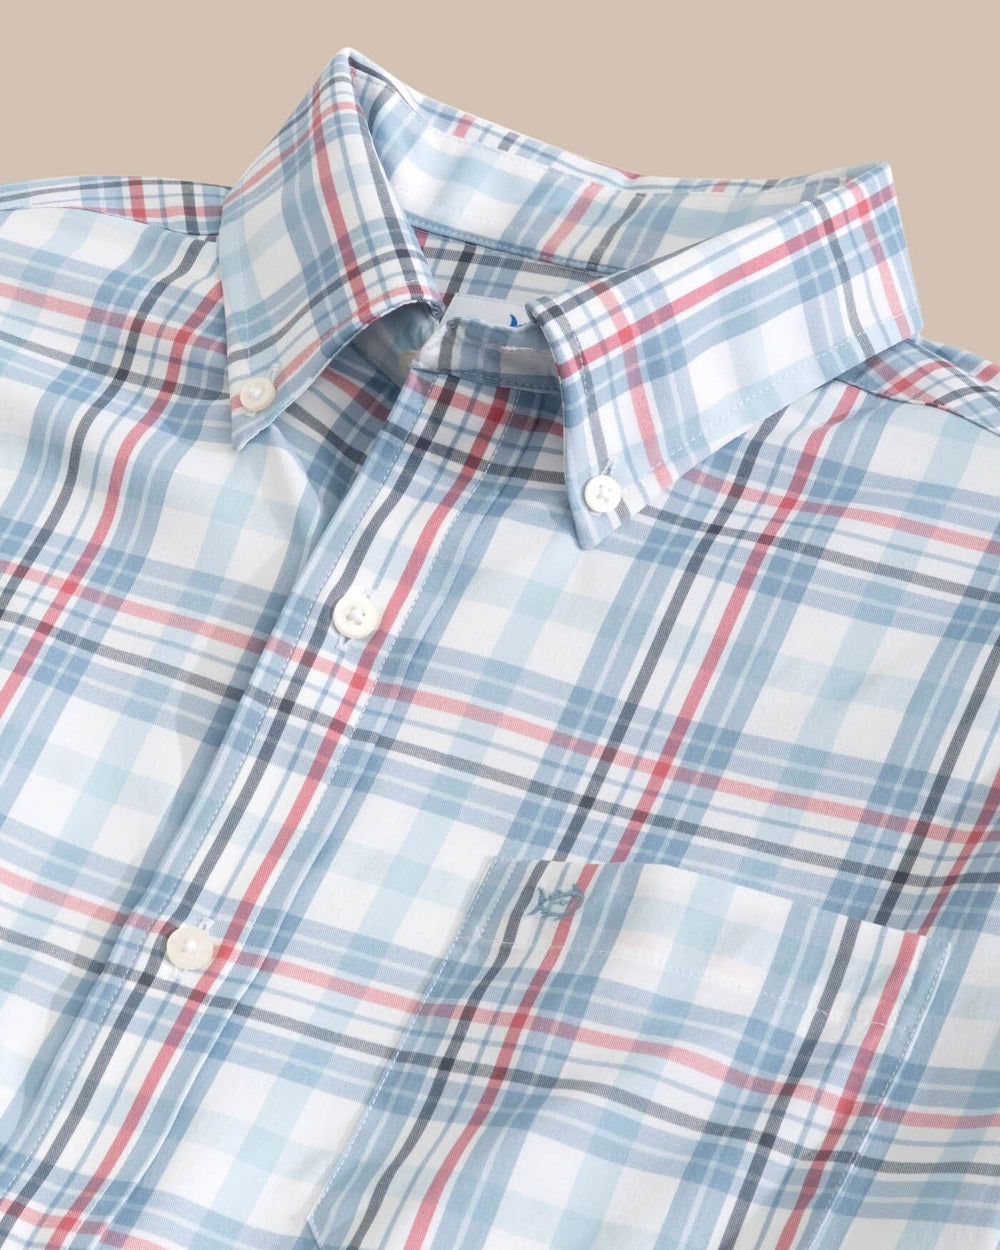 The detail view of the Southern Tide Durwood Plaid Intercoastal Sport Shirts by Southern Tide - Dream Blue